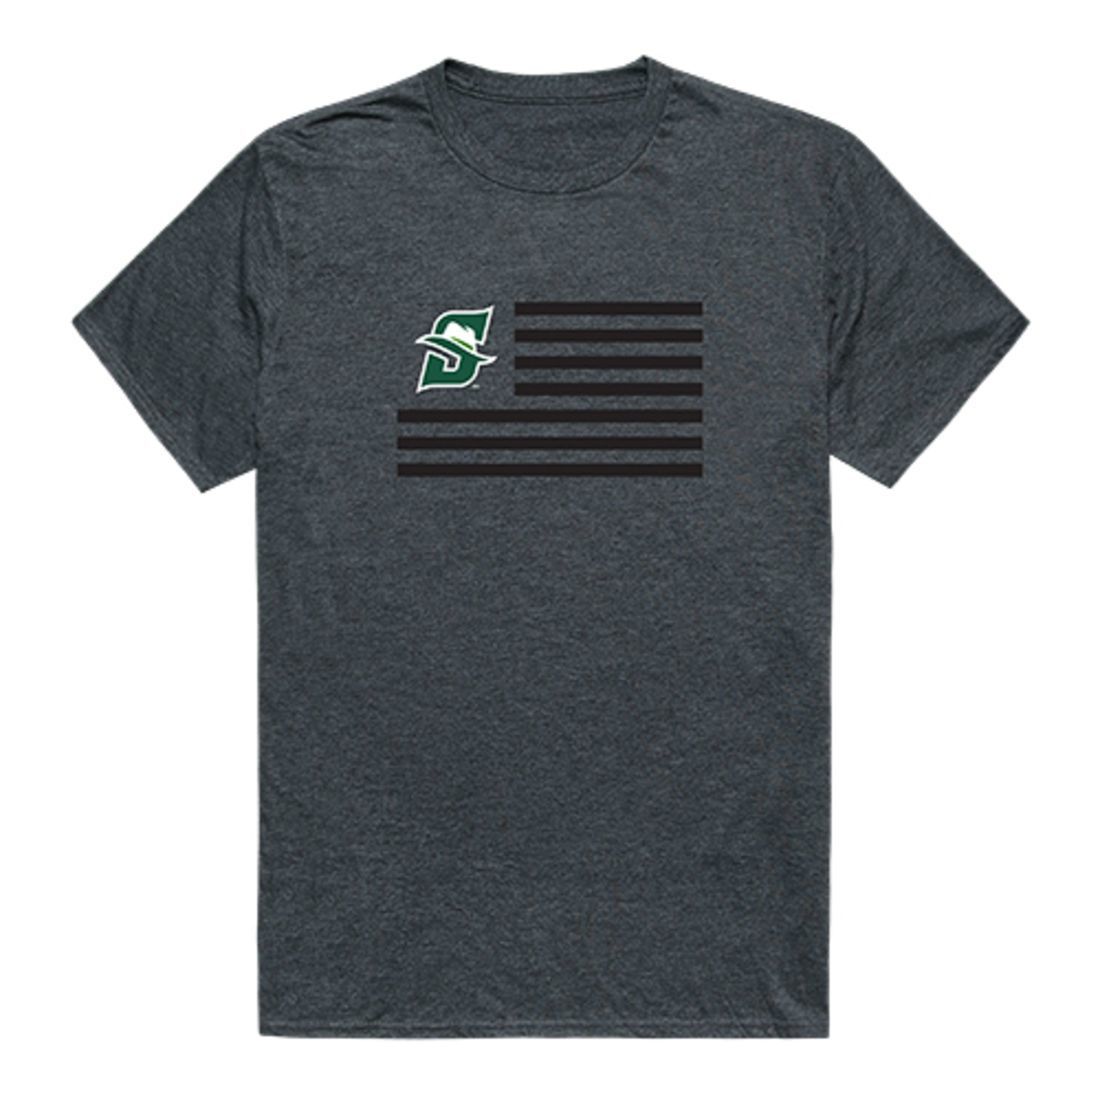 Stetson University Hatters USA Flag Tee T-Shirt Heather Charcoal-Campus-Wardrobe